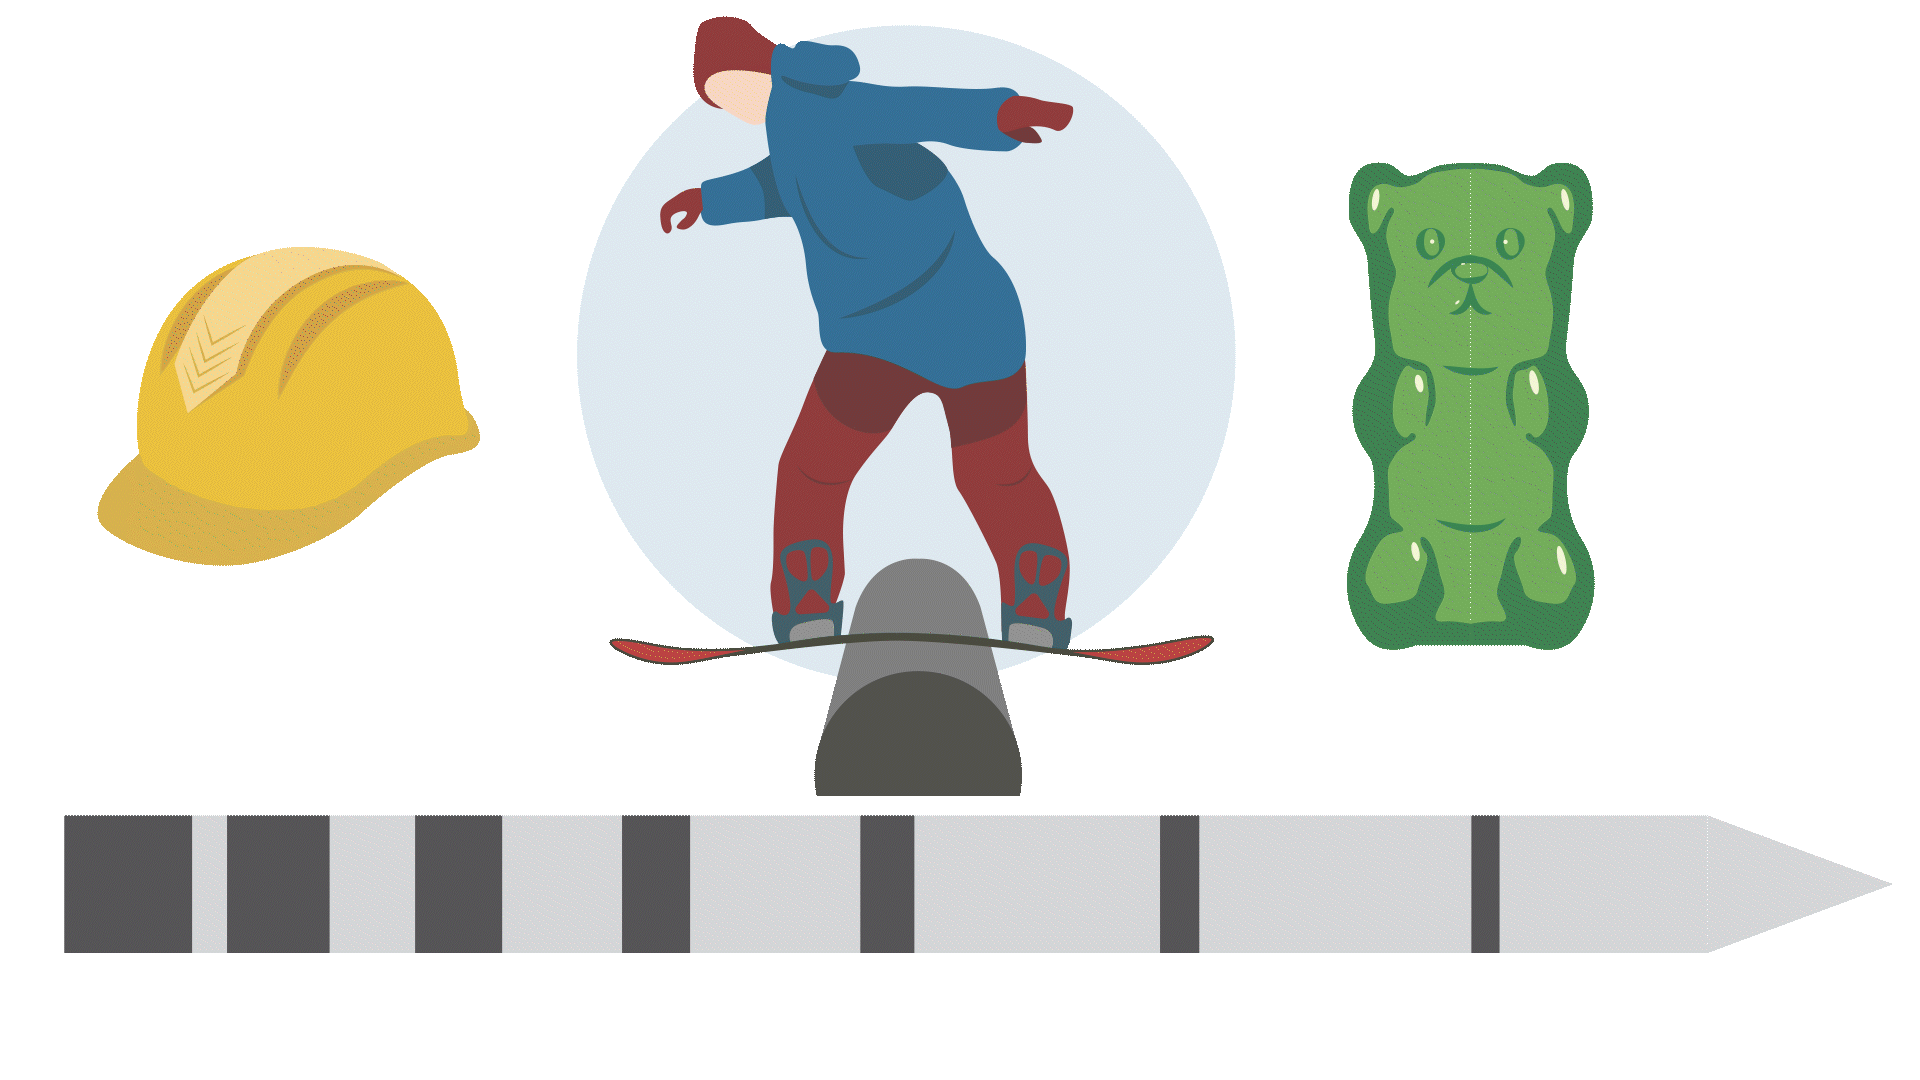 Text: Scale of elasticity. Scale alternates between different sized dark and light grey sections. Above the scale are 3 images. First is a yellow hard-hat with text Withstands impact and High hardness. Second is a blue circle with person snowboarding on a curved ramp, in blue and red snow-suit with text Doesn&#039;t hold deformed shape and Bounces back. Third is a green gummy bear with text Can&#039;t go back to the original shape after deformations and Easy to deform.